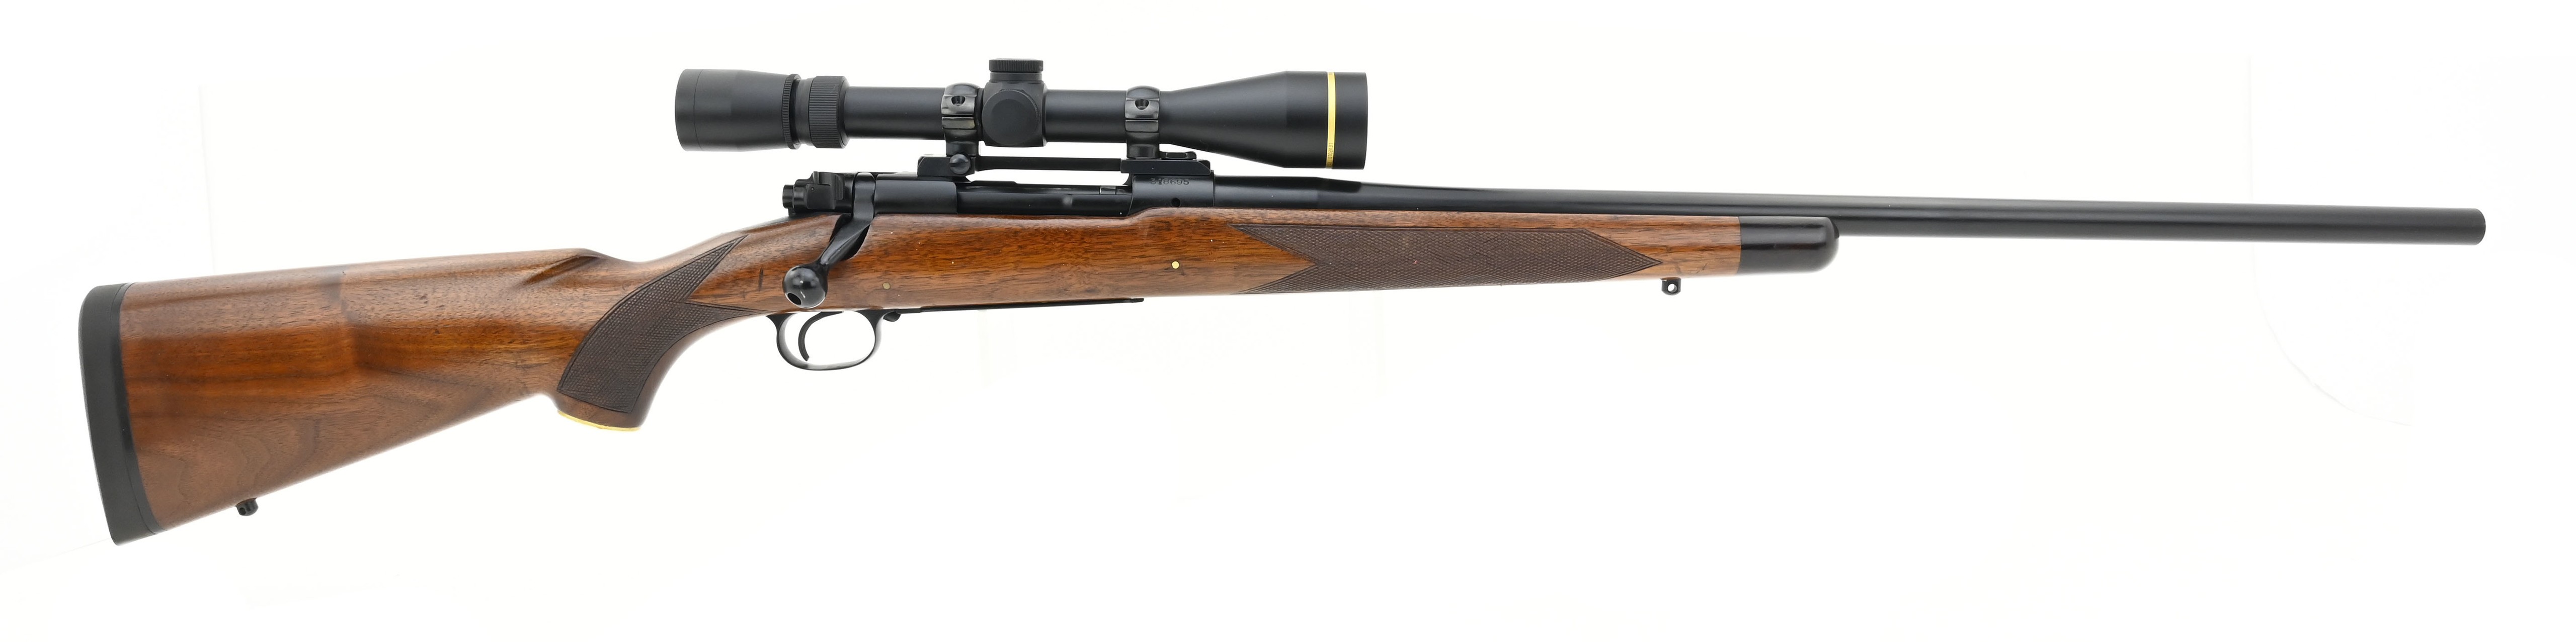 winchester-70-375-h-h-magnum-caliber-rifle-for-sale